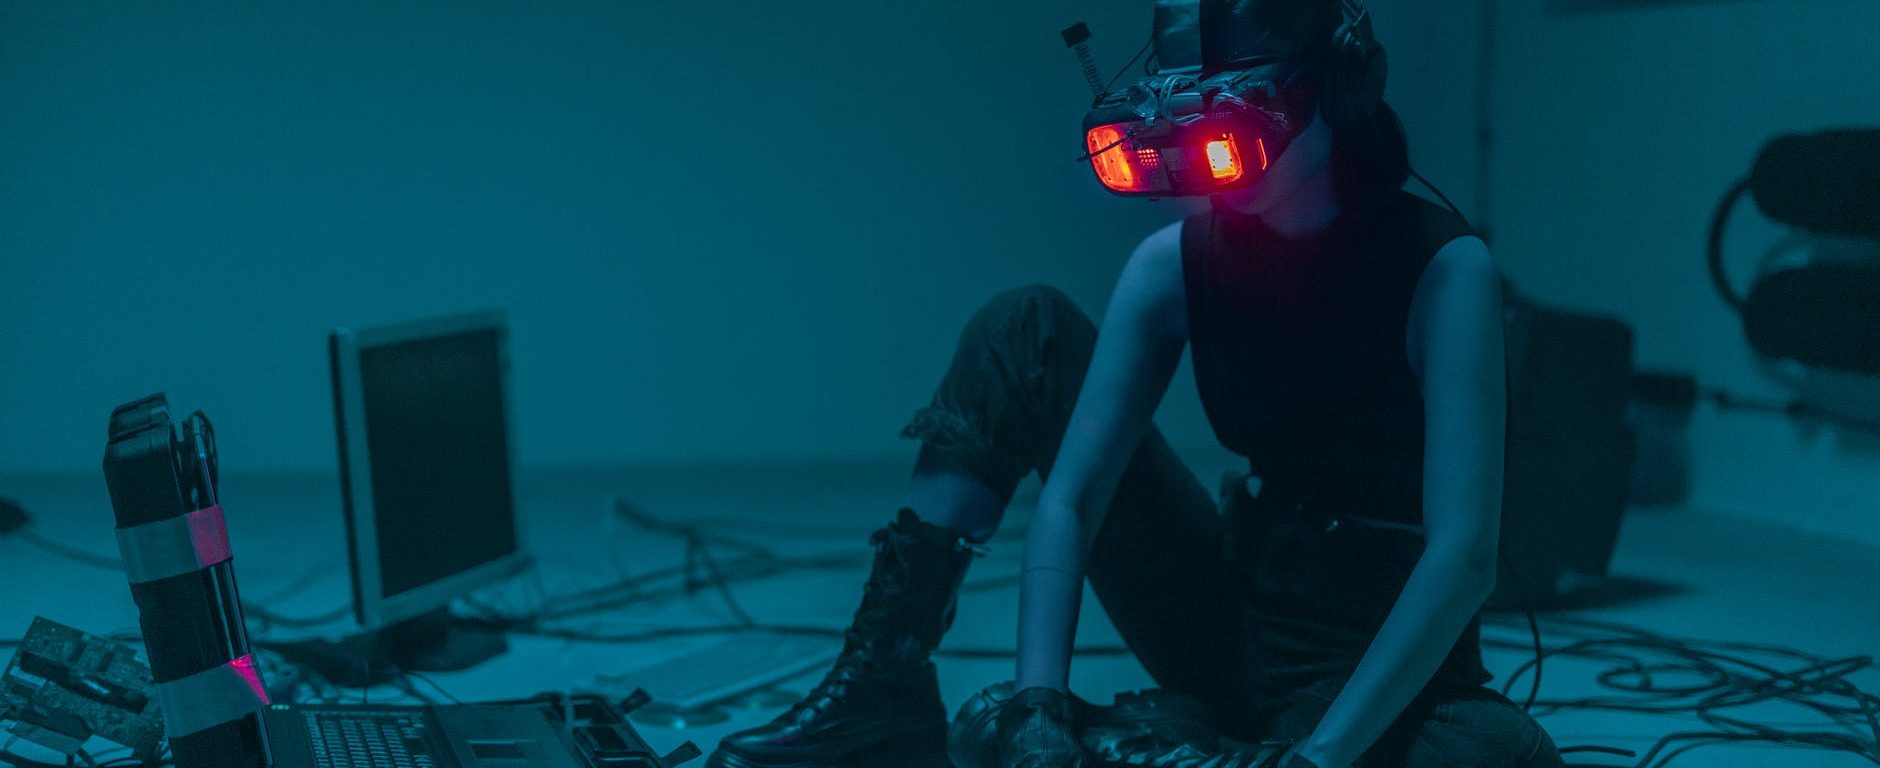 a person sitting on the floor with vr goggles using a computer